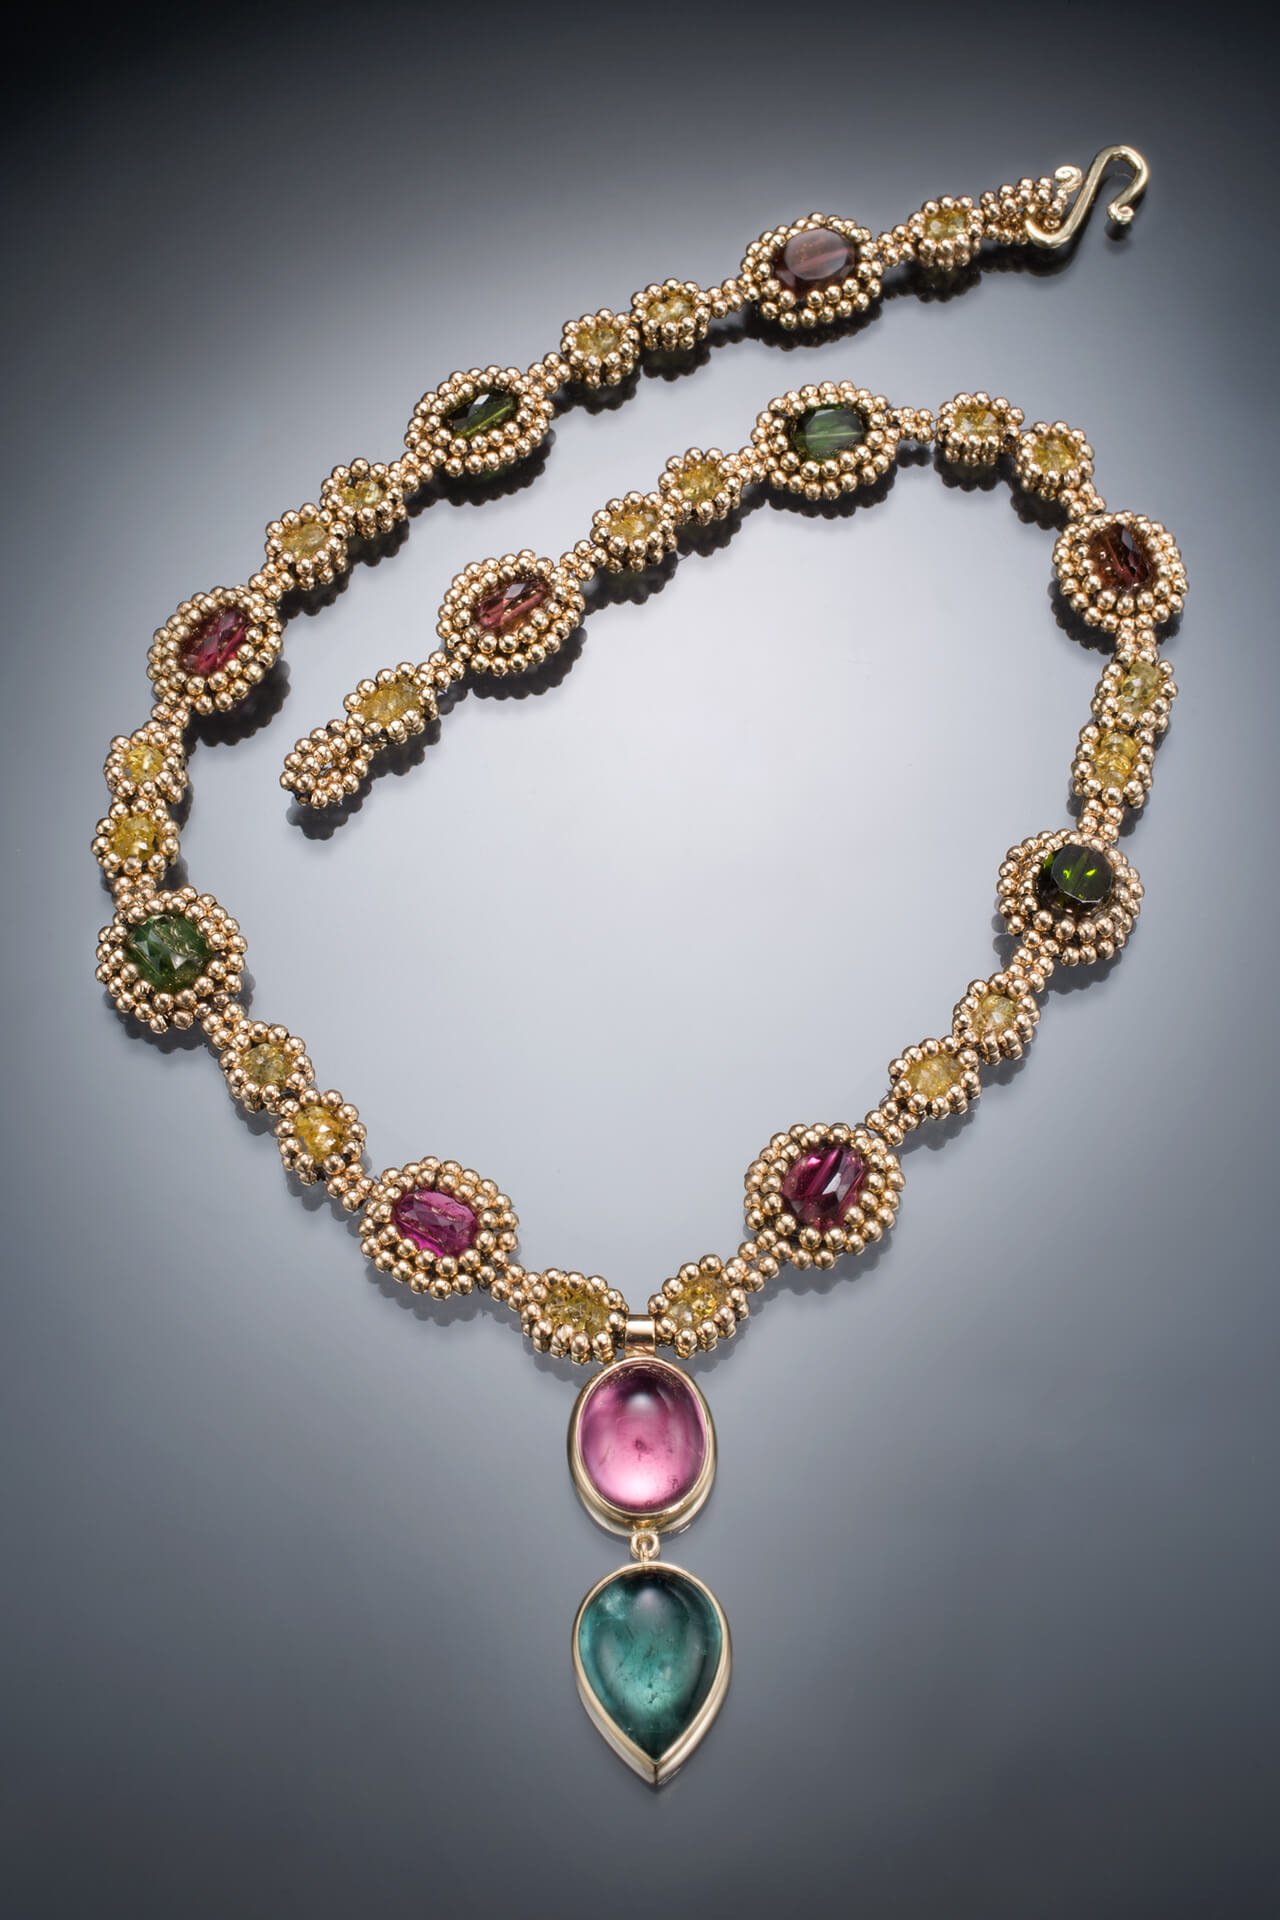 The Princess Necklace is hand woven of 14k round gold beads, yellow sapphires, and multicolor tourmaline beads. The bezels are fabricated of 14k gold and set with pink and blue tourmaline cabochons.